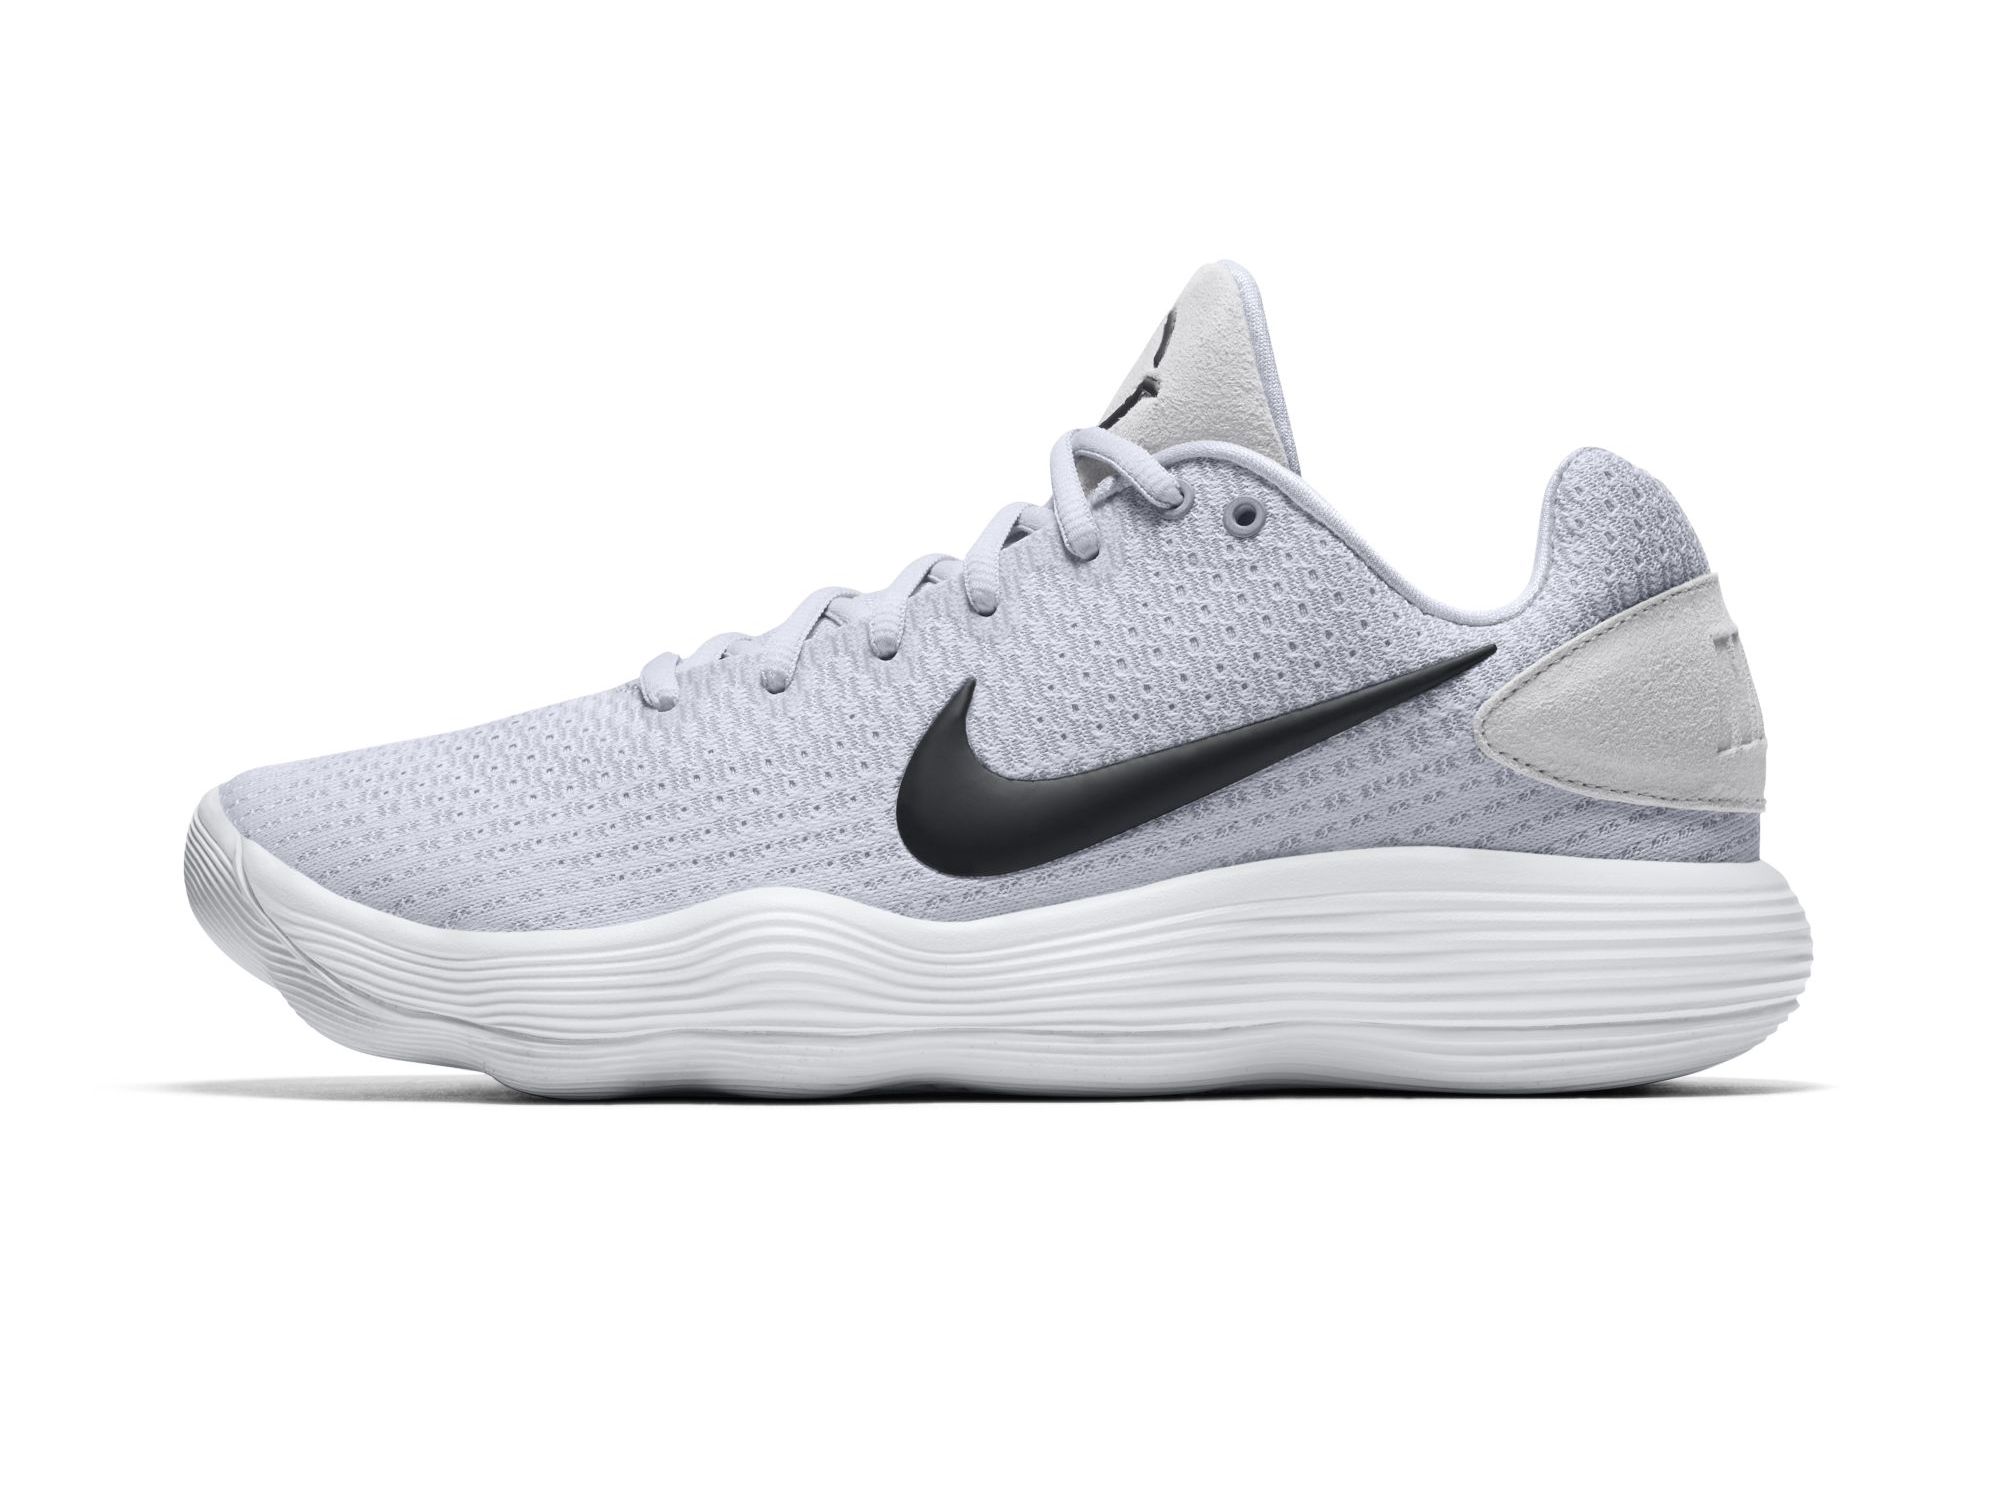 Nike Hyperdunk 2017 Low Images | Sole